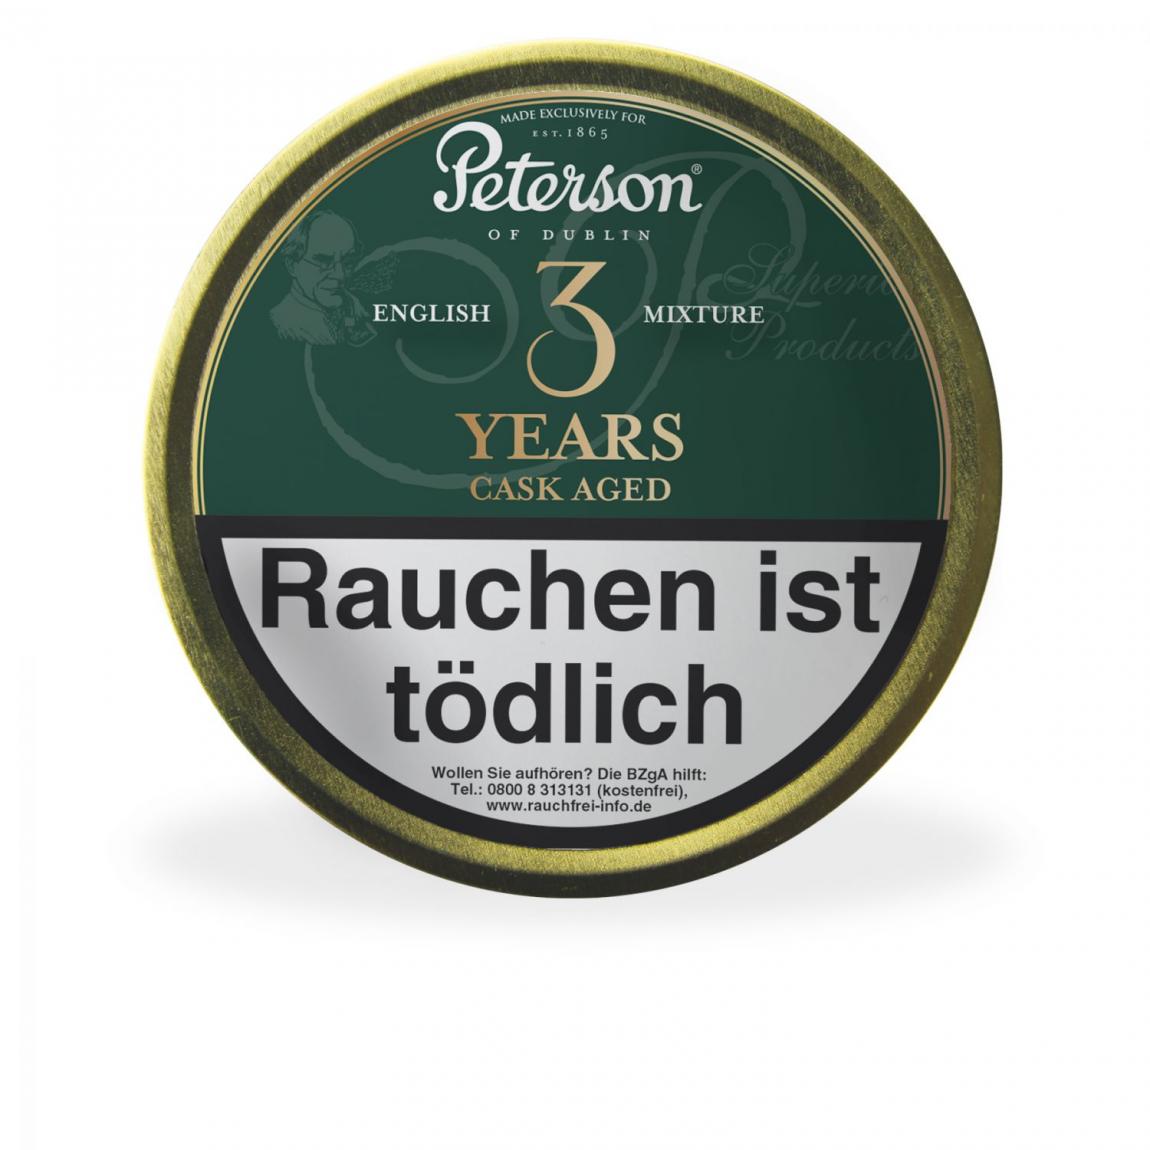 Peterson »3 Years Cask Aged« English Mixture